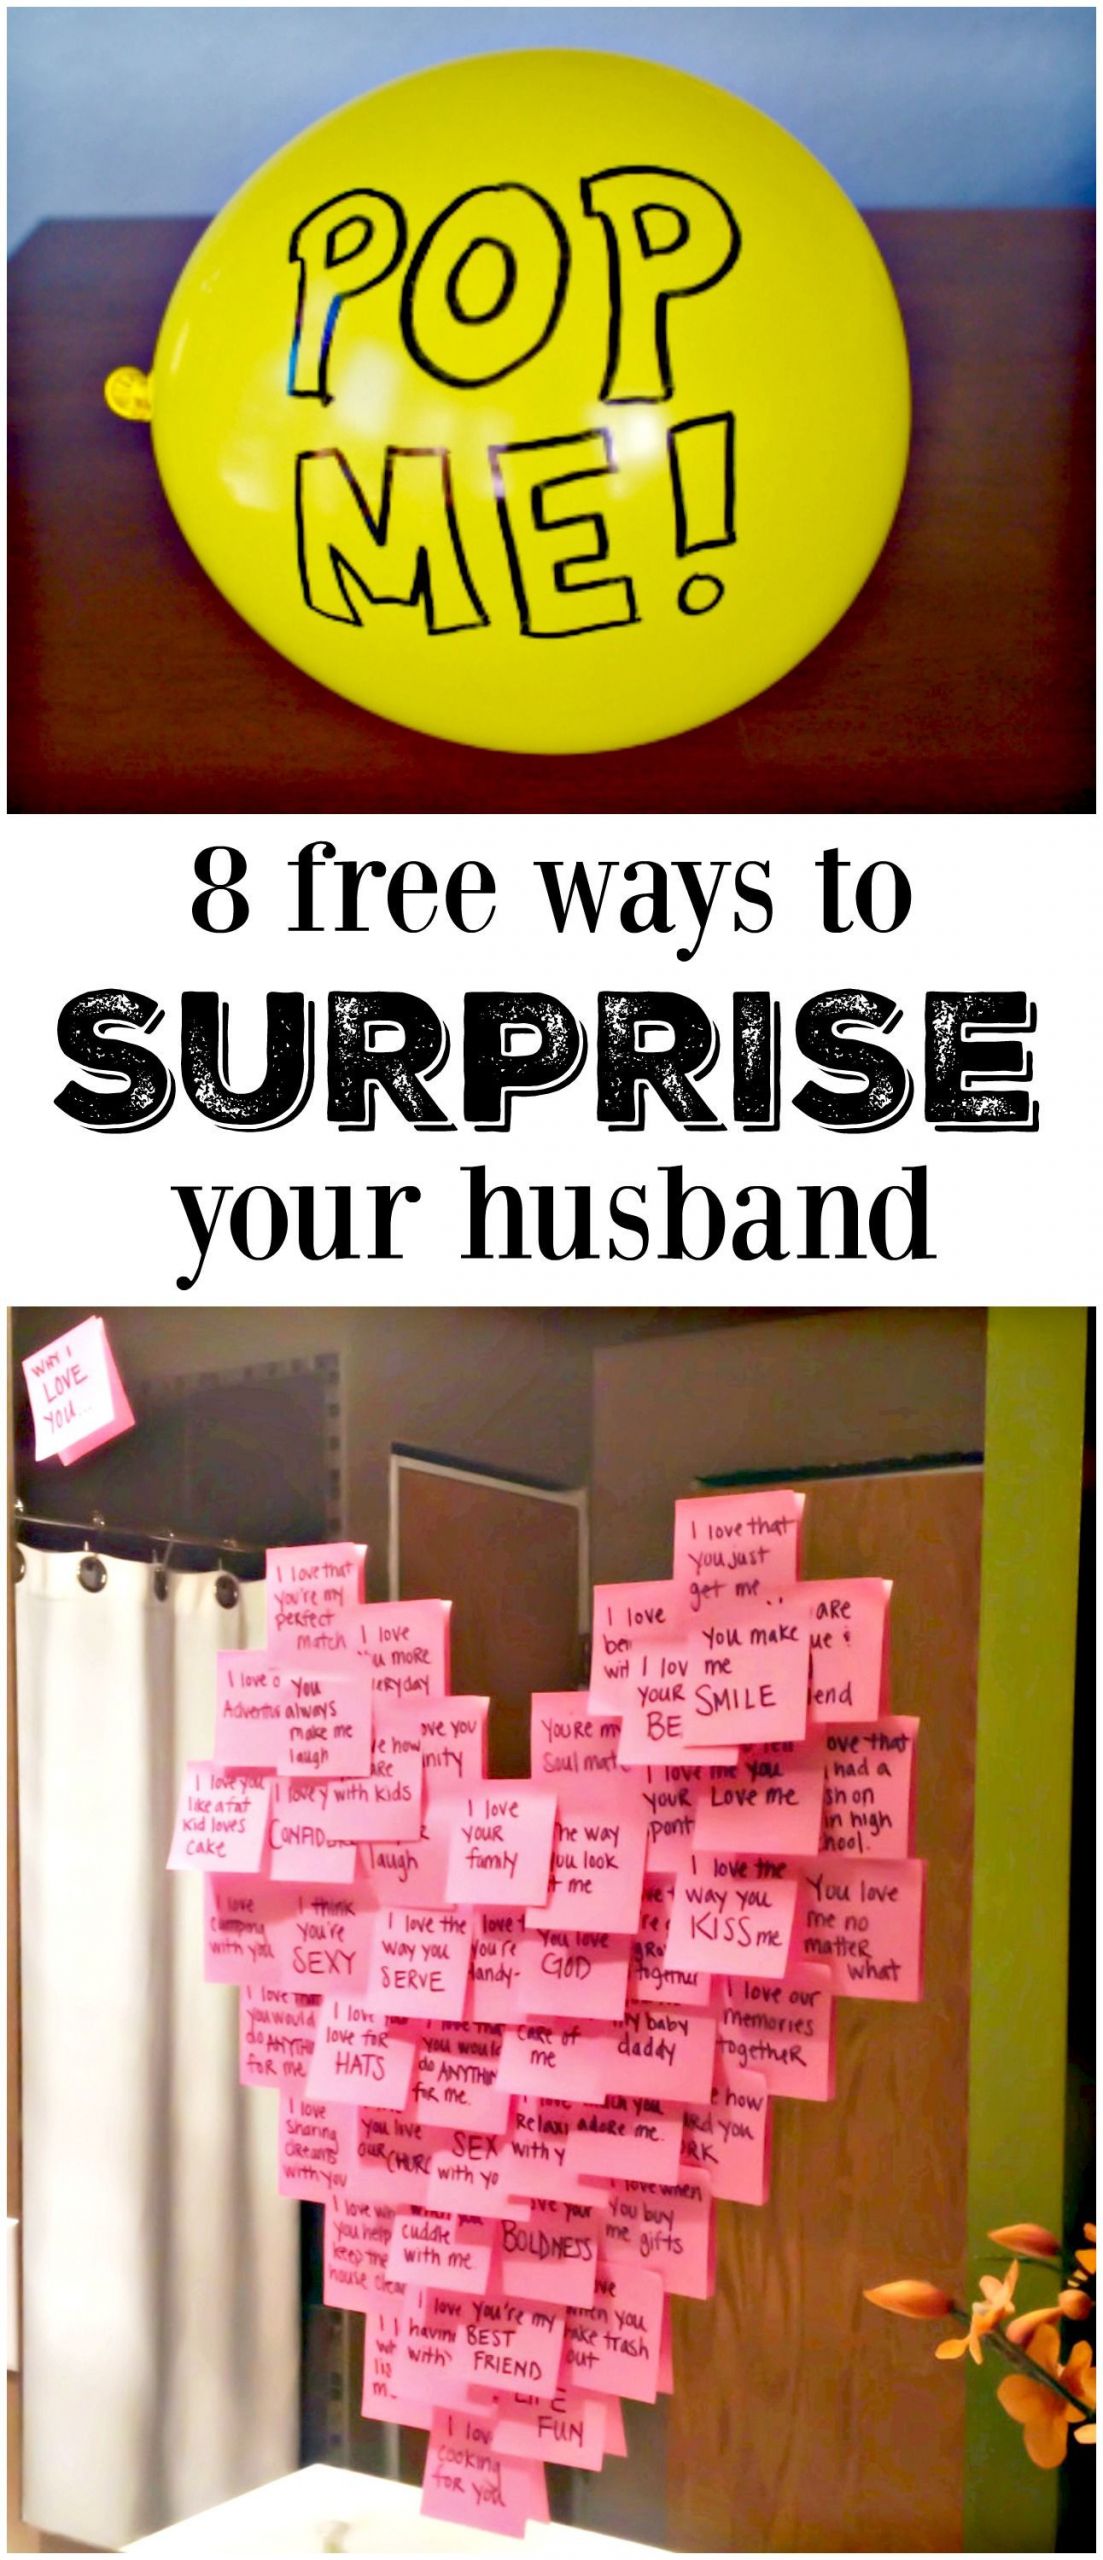 Creative Gift Ideas For Husband Birthday
 8 Meaningful Ways to Make His Day